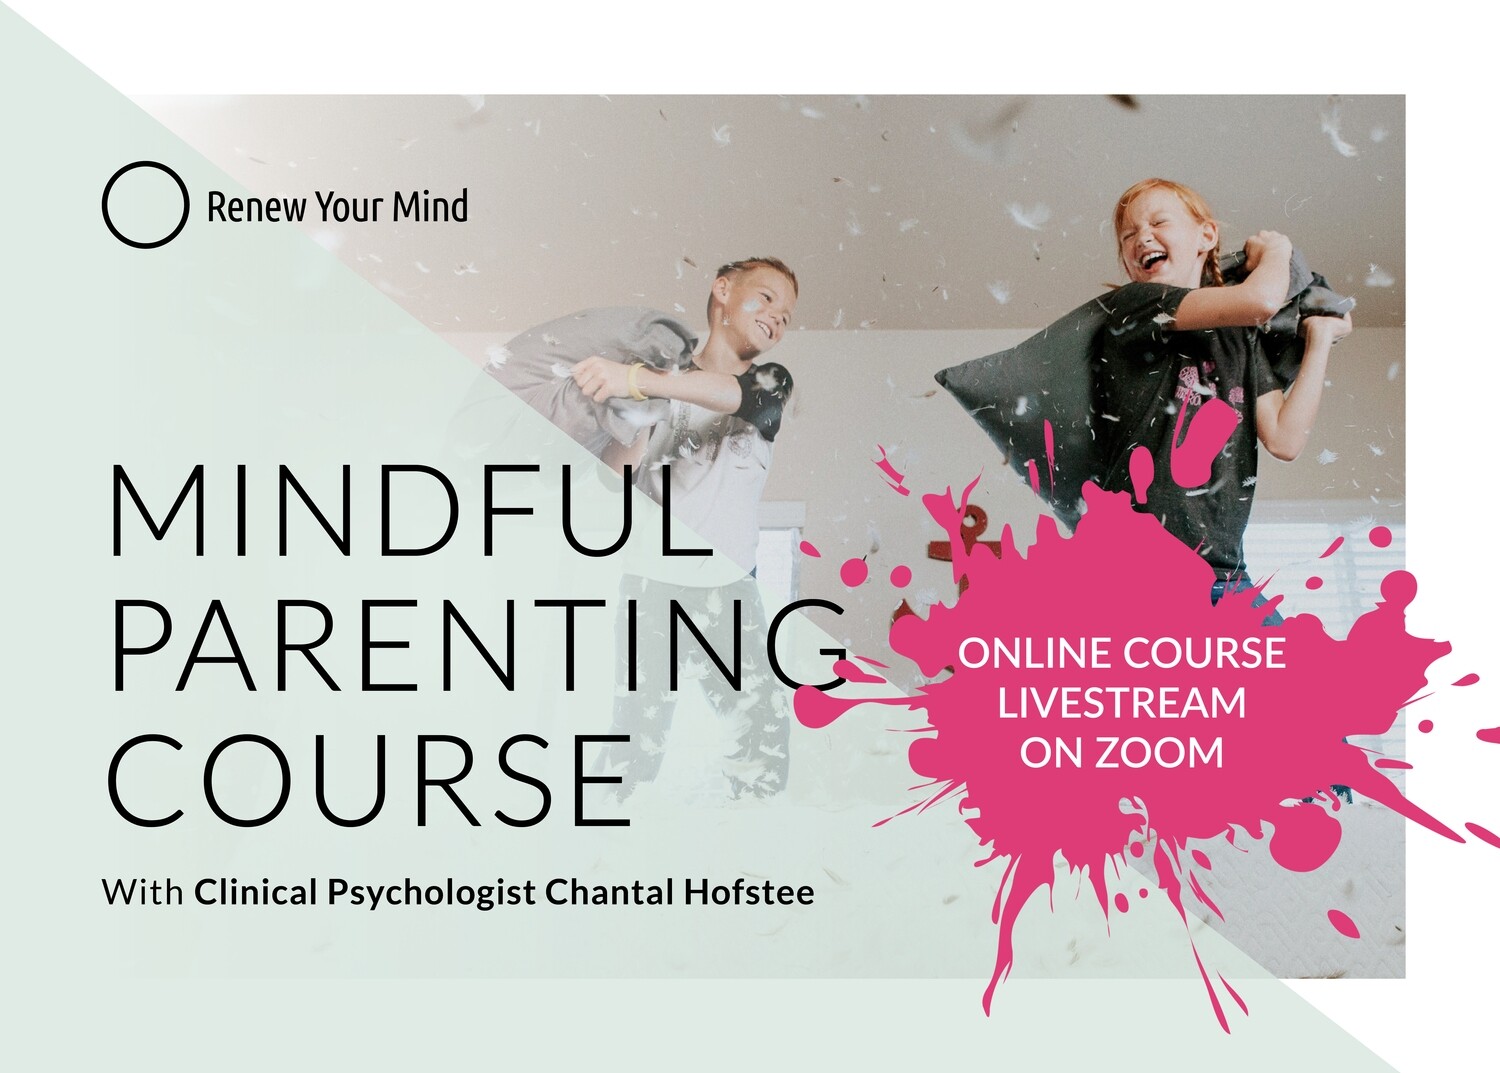 Online Mindful Parenting course: 6 session course, starting Wed 10 August '22